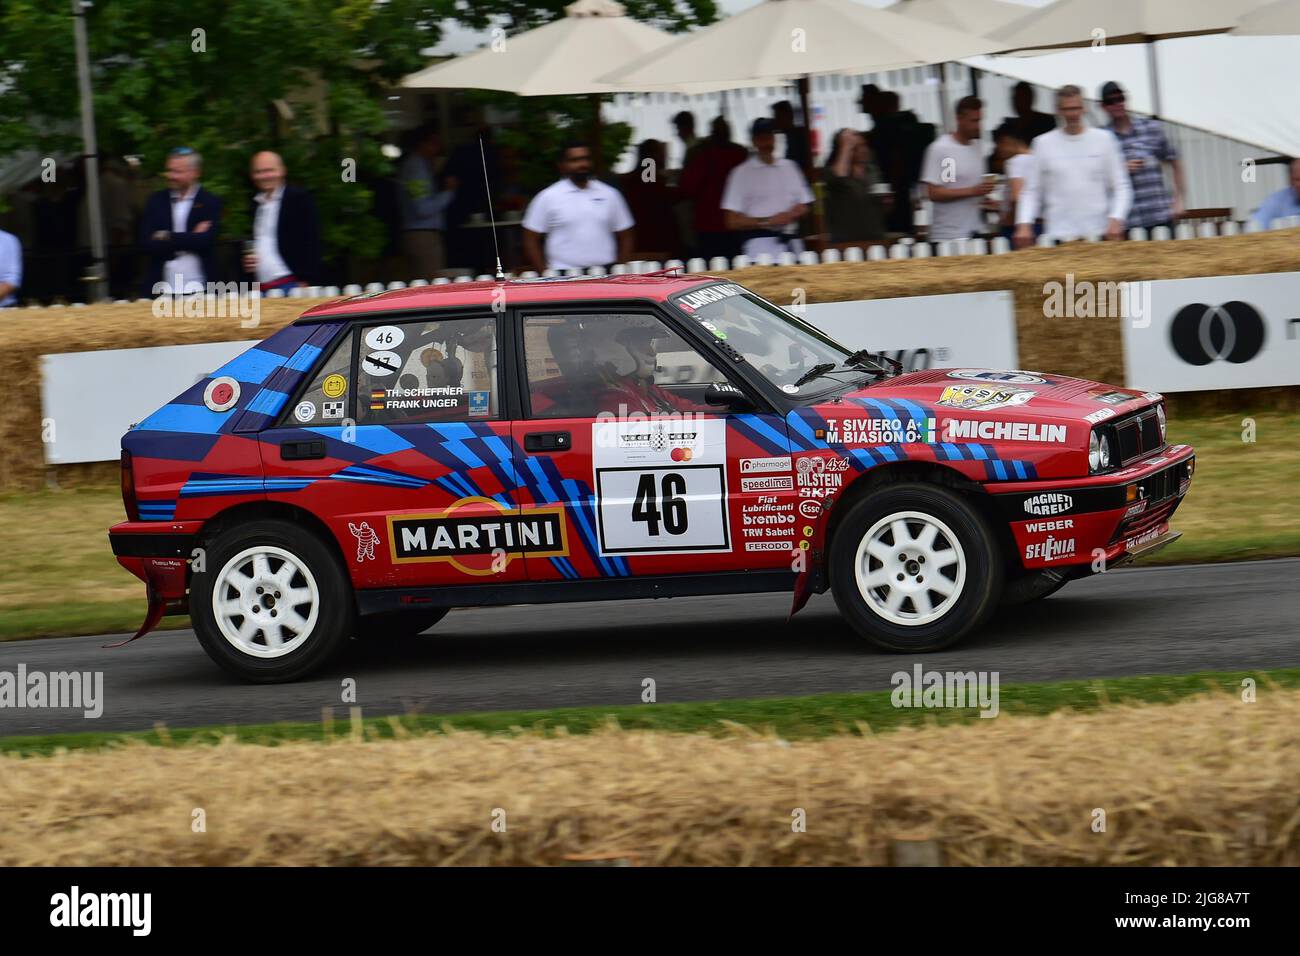 Frank Unger, Thorsten Scheffner, Lancia Delta HF Integrale 16V, Dawn of Modern Rallying, Forest Rally Stage, Goodwood Festival of Speed, The Innovator Stock Photo